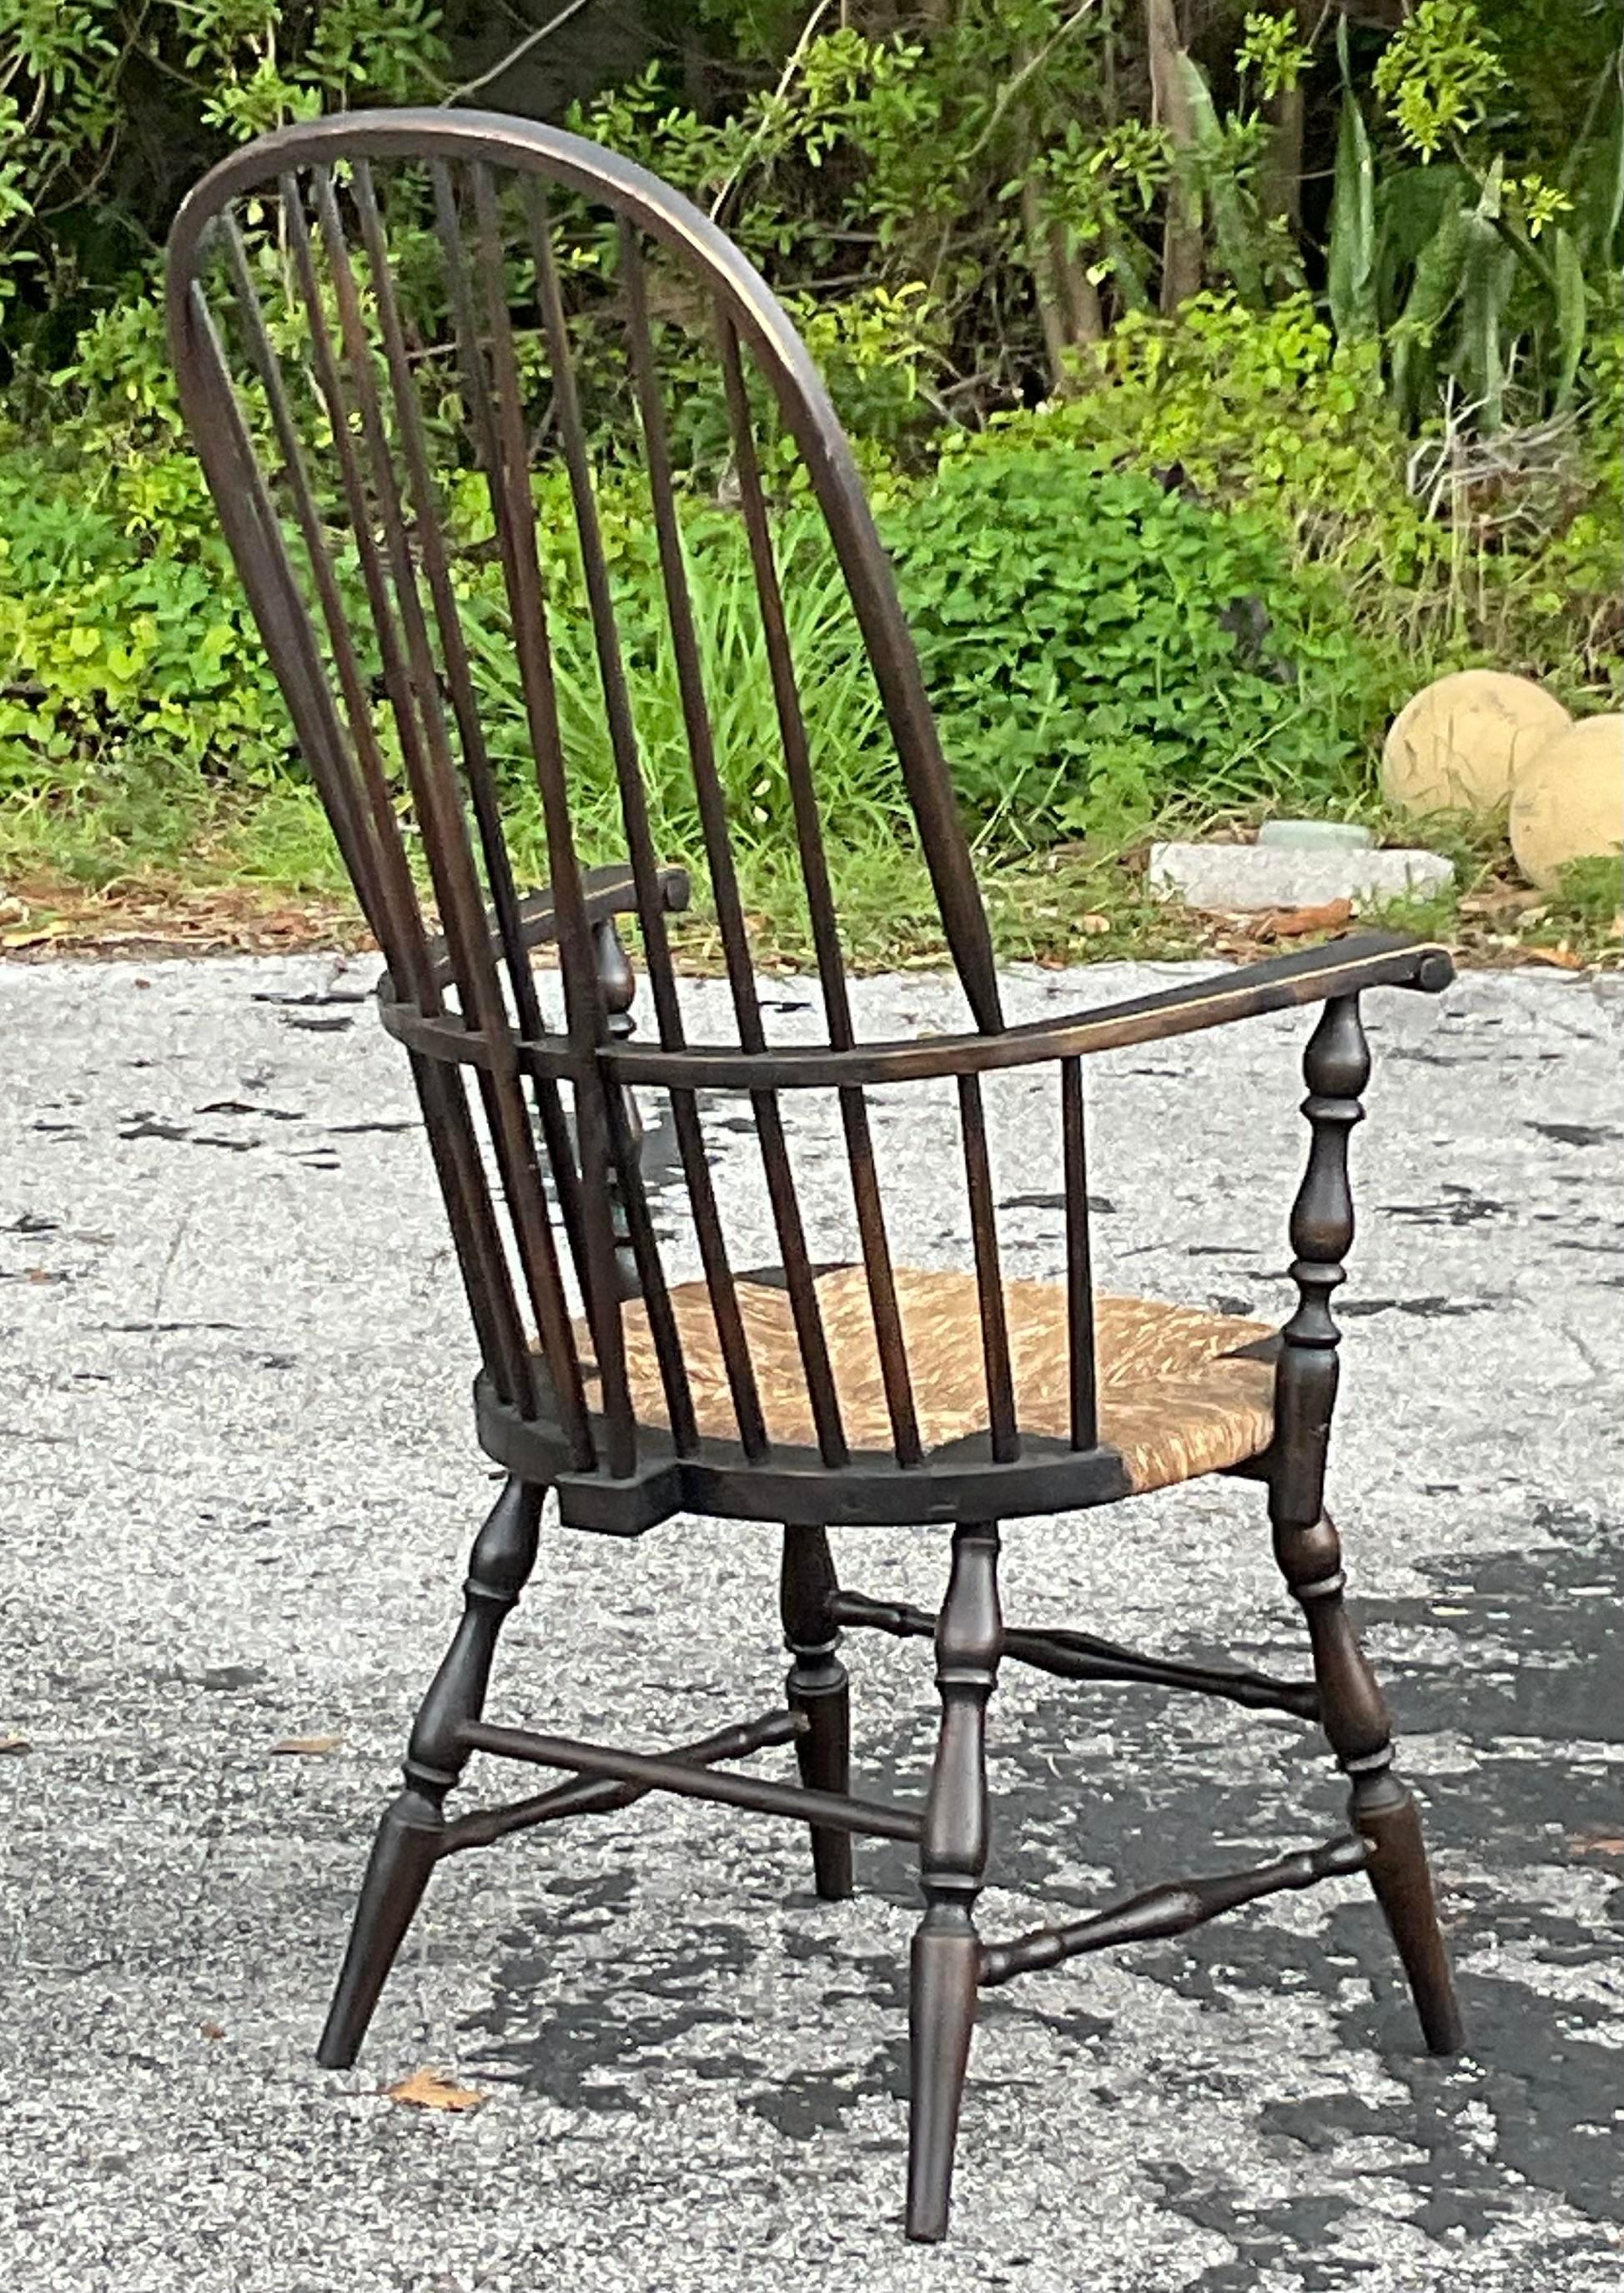 Vintage Traditional Windsor Hoop Back Chair - Timeless craftsmanship meets comfort in this iconic Windsor design. With its distinctive hoop back and traditional styling, this vintage chair brings a touch of nostalgia and enduring elegance to any